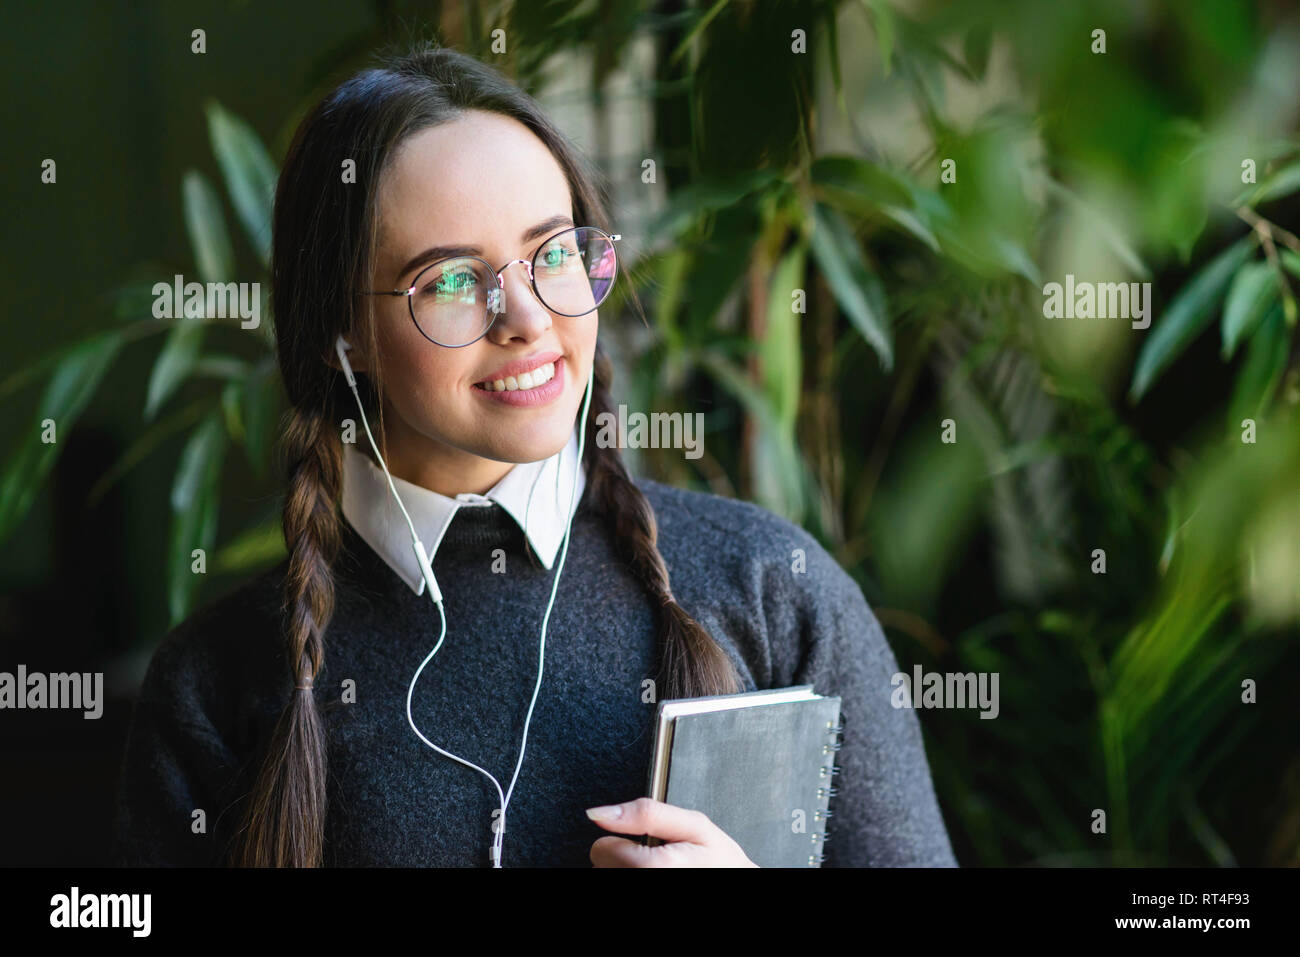 Brunette girl with braids wearing uniform standing near the window and listening music Stock Photo